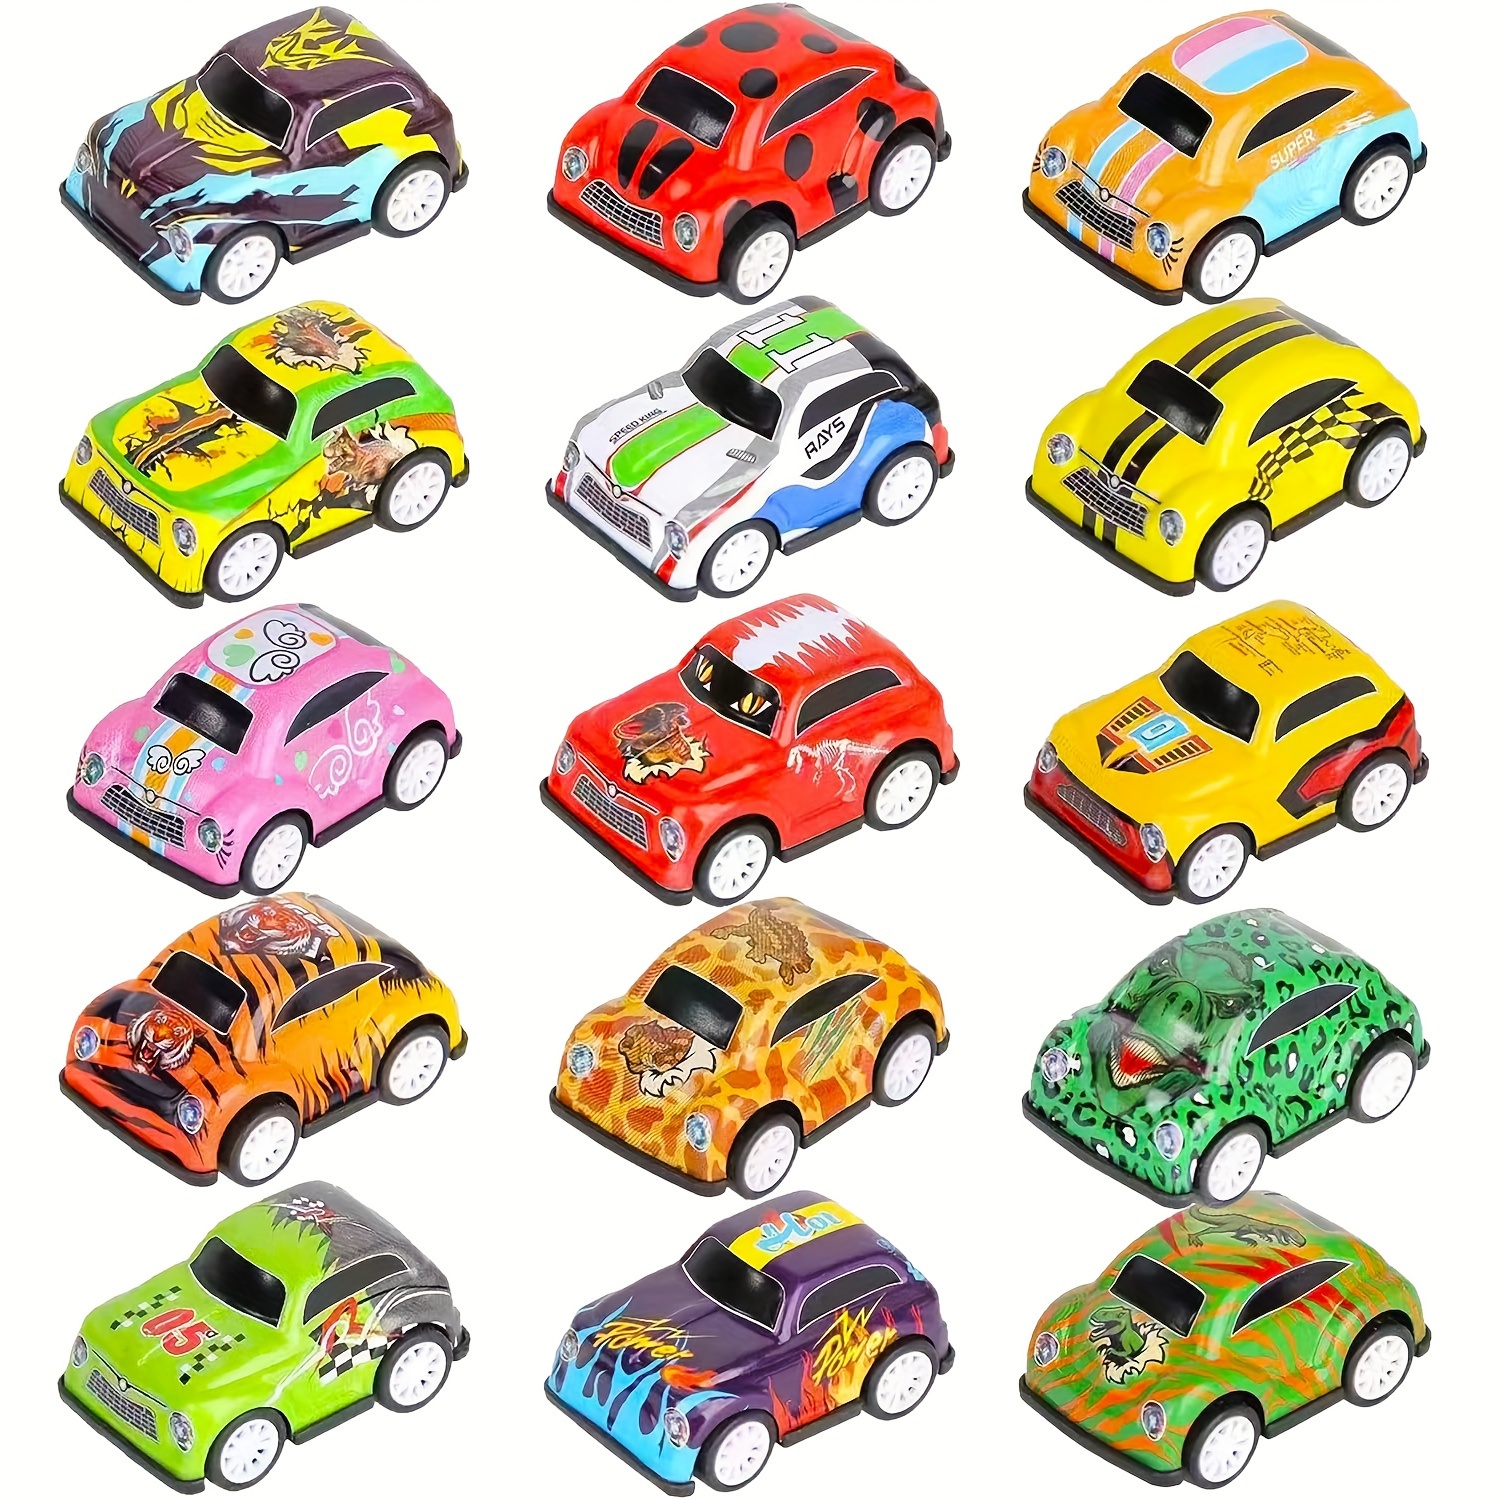 

15pcs Pull Back Toy Cars Mini Vehicles Toy In Bulk, Party Favor Race Cars Toys, Goodie Bag Stuffers, Christmas Fillers For Boys Girls